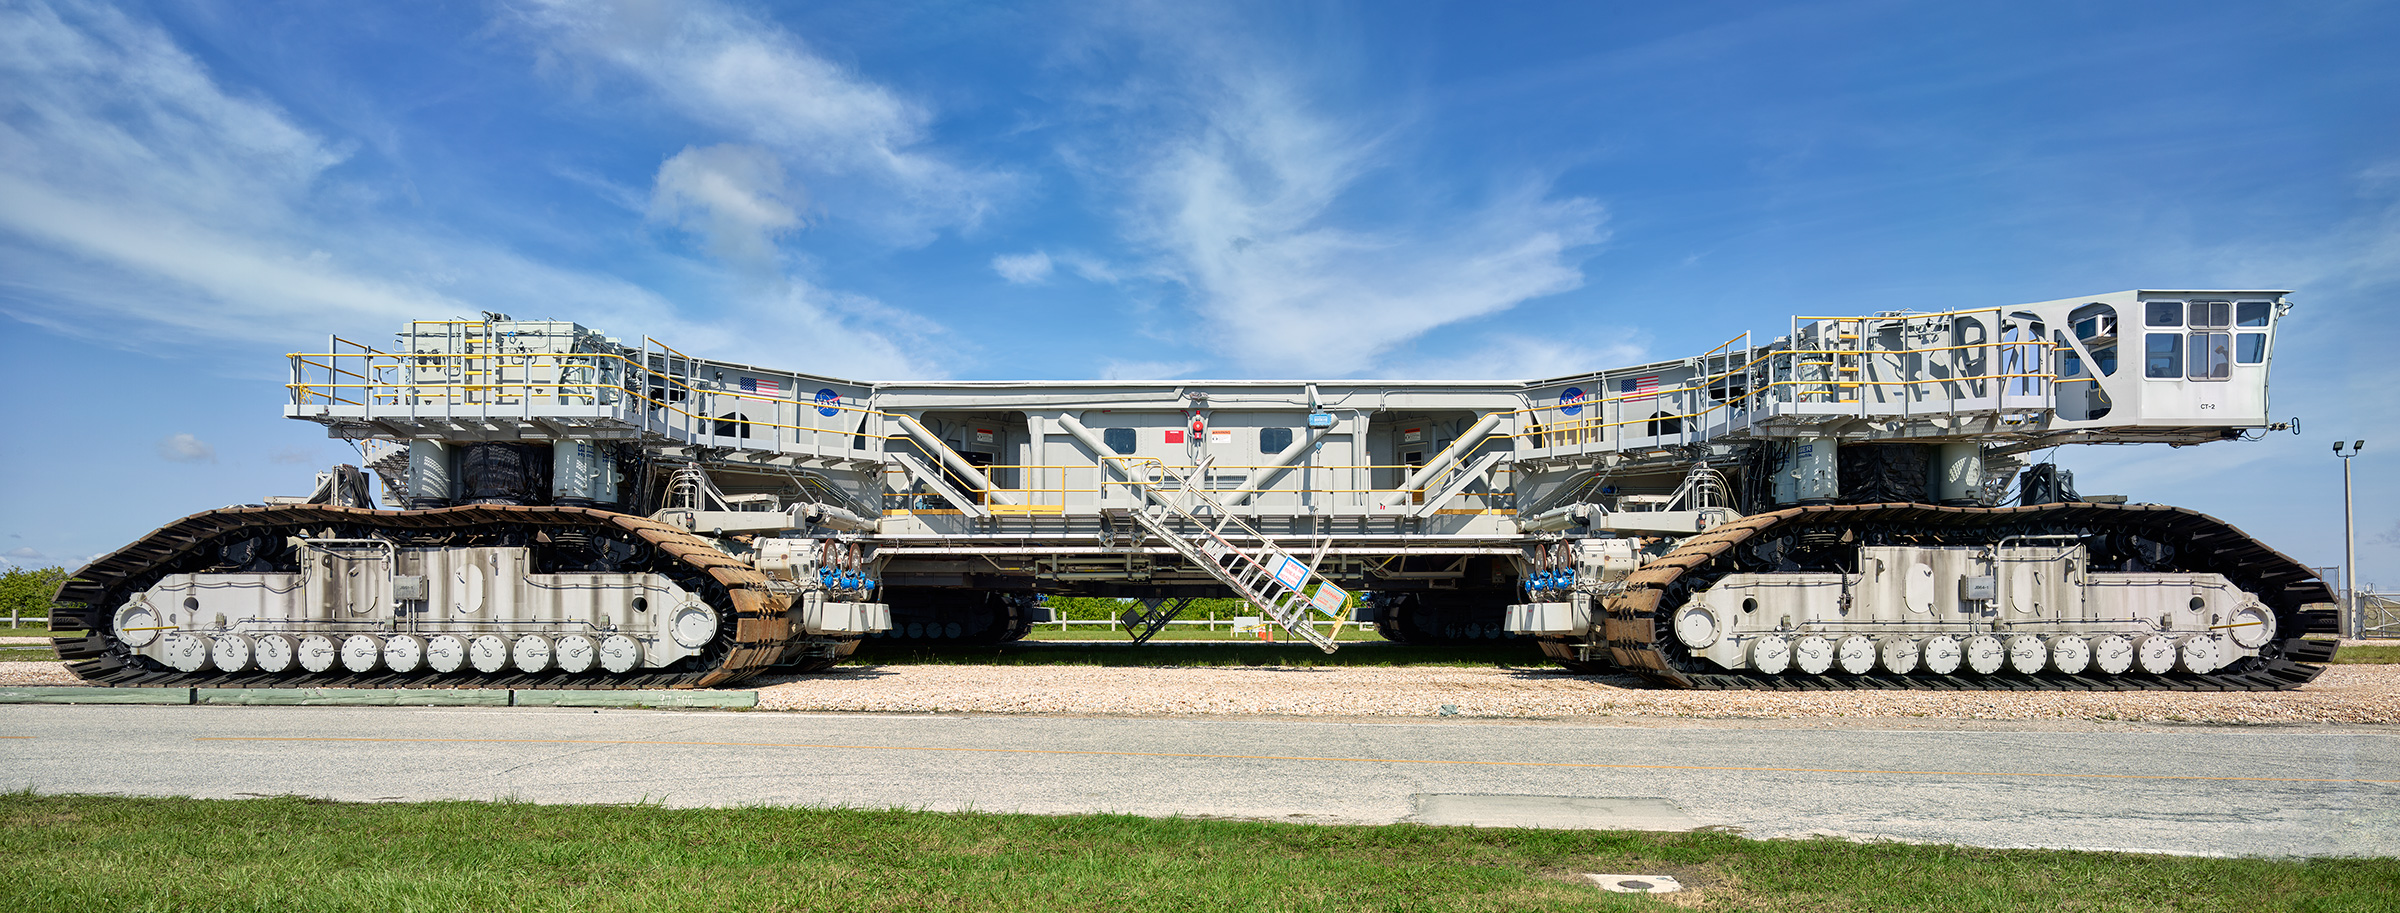 The vehicle NASA will use to transport its mobile launcher from the assembly facility to the launchpad (Christopher Payne for TIME)